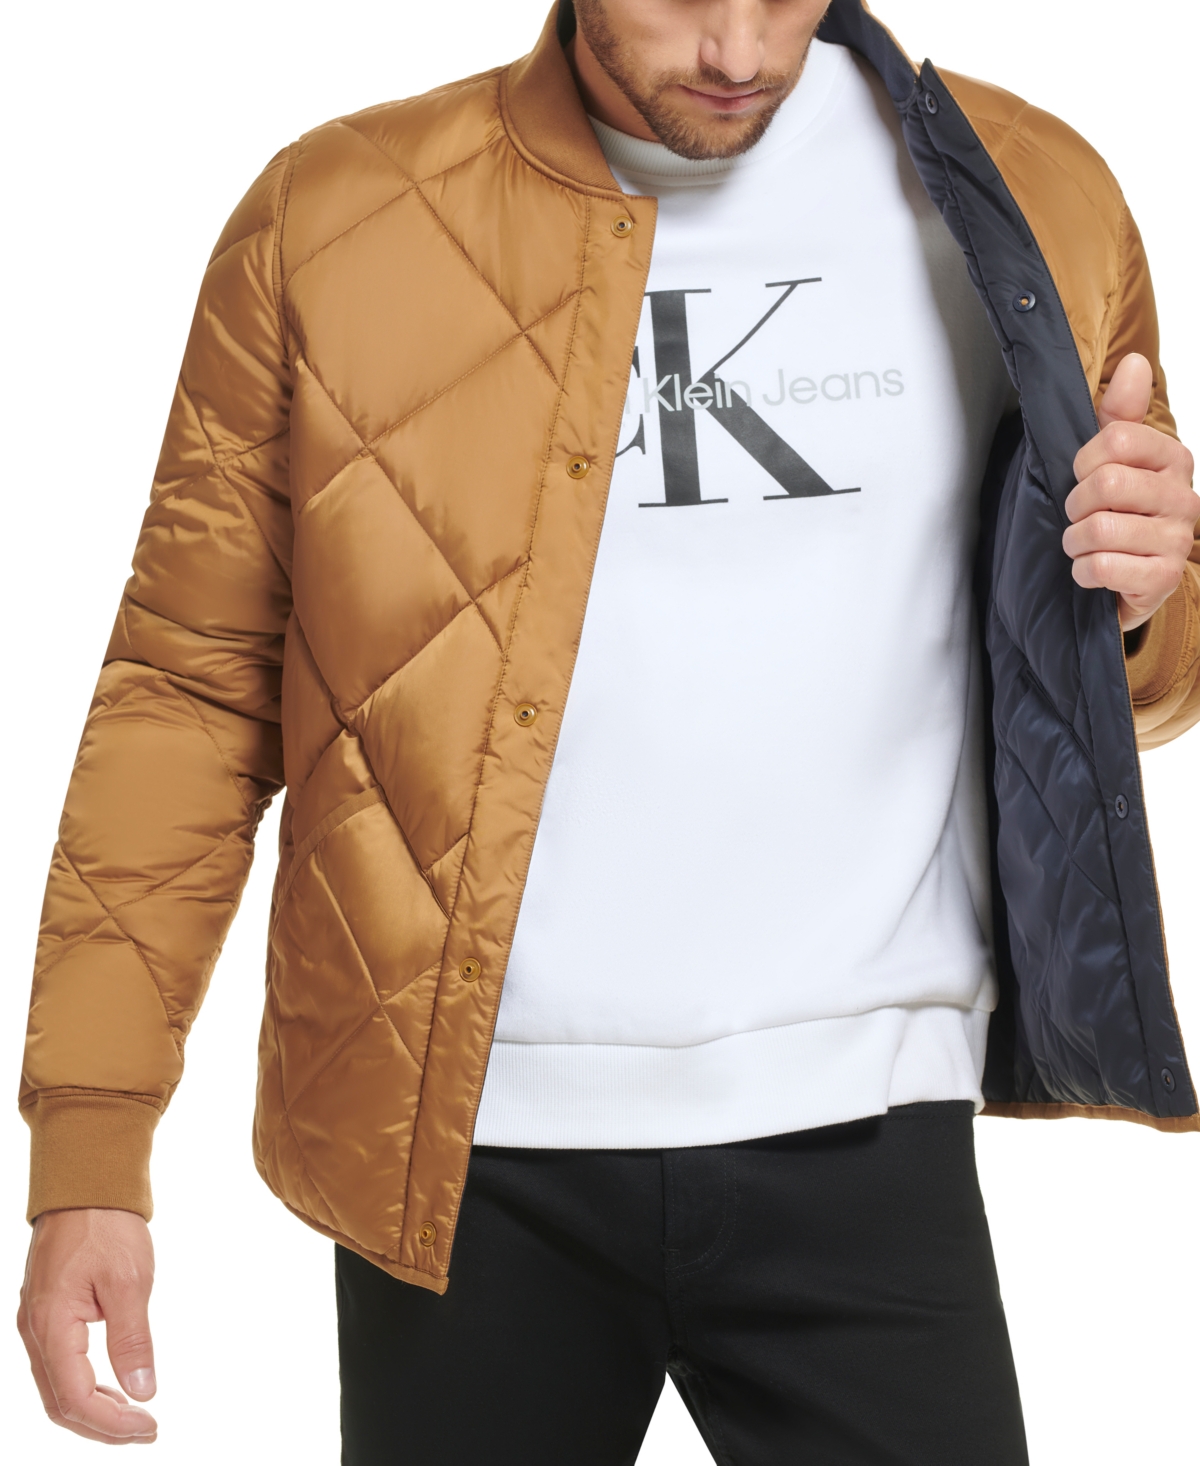 Calvin Klein Men's Reversible Quilted Jacket - Olive - Size M